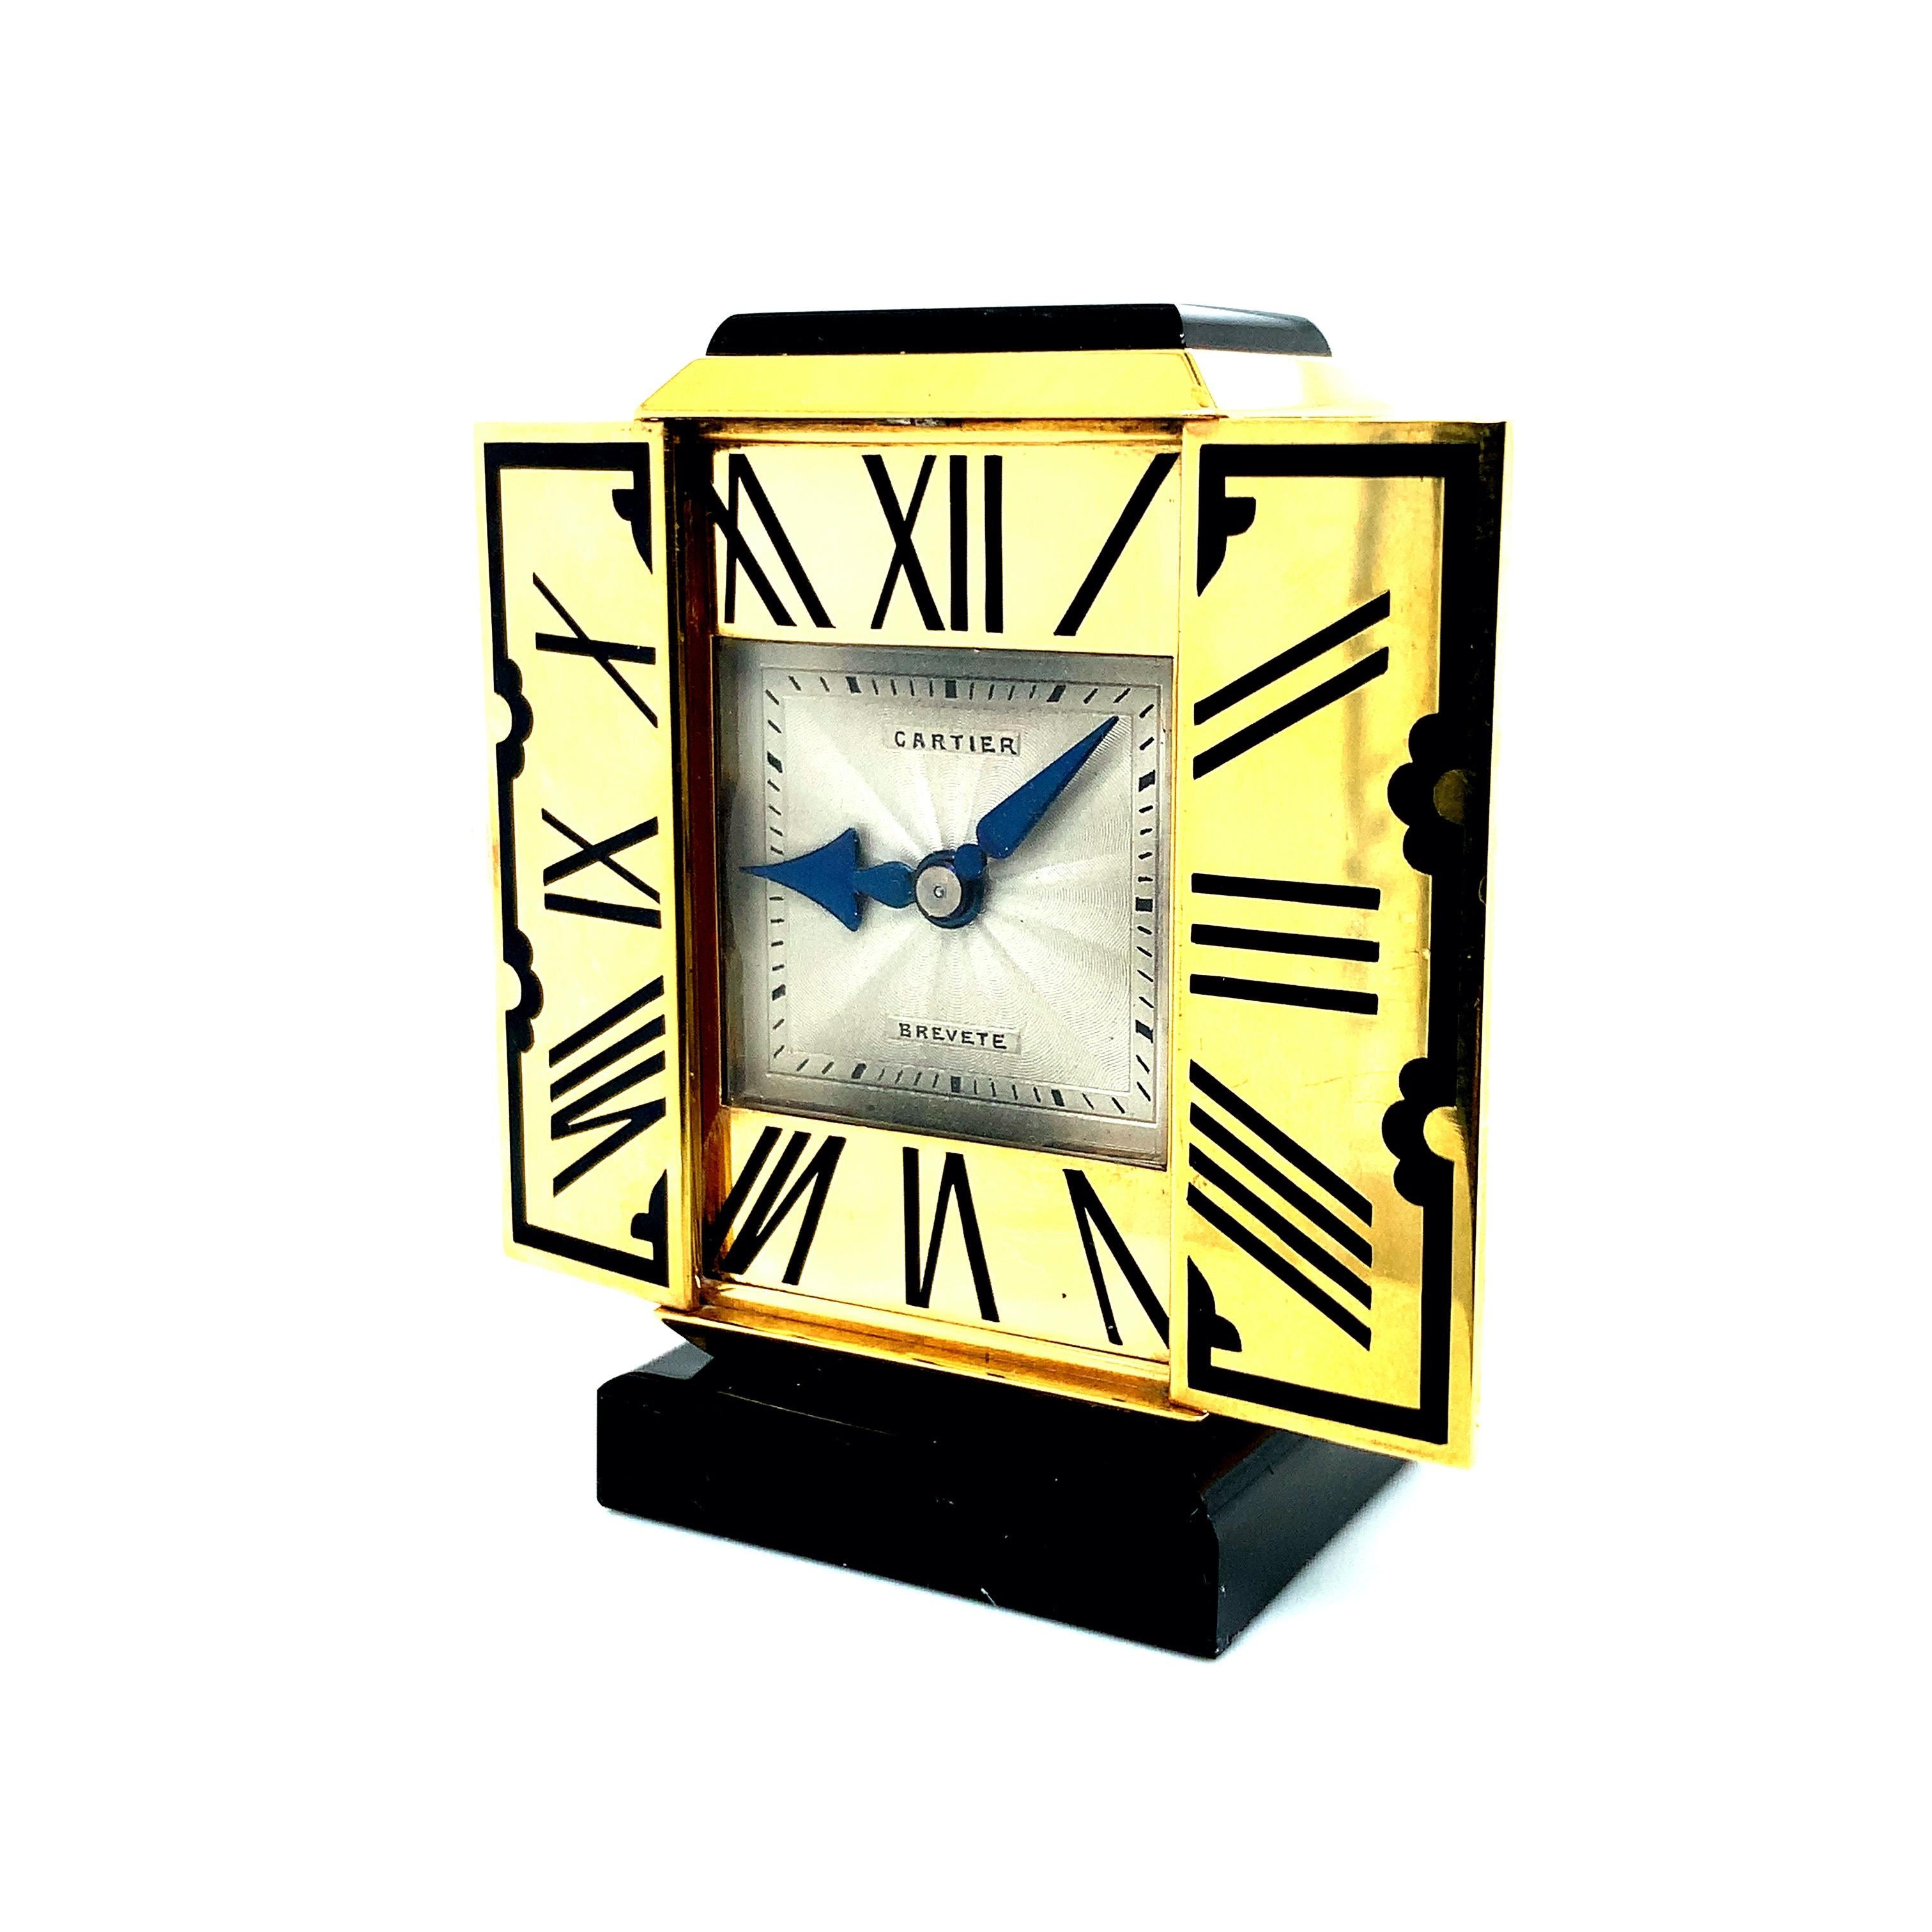 This travel clock is triptych shaped. When its doors are opened, the dial appears, which is adorned with hours in black enameled Roman numerals in an oriental style frame. The square dial in guilloché silver with railroad tracks and blued steel